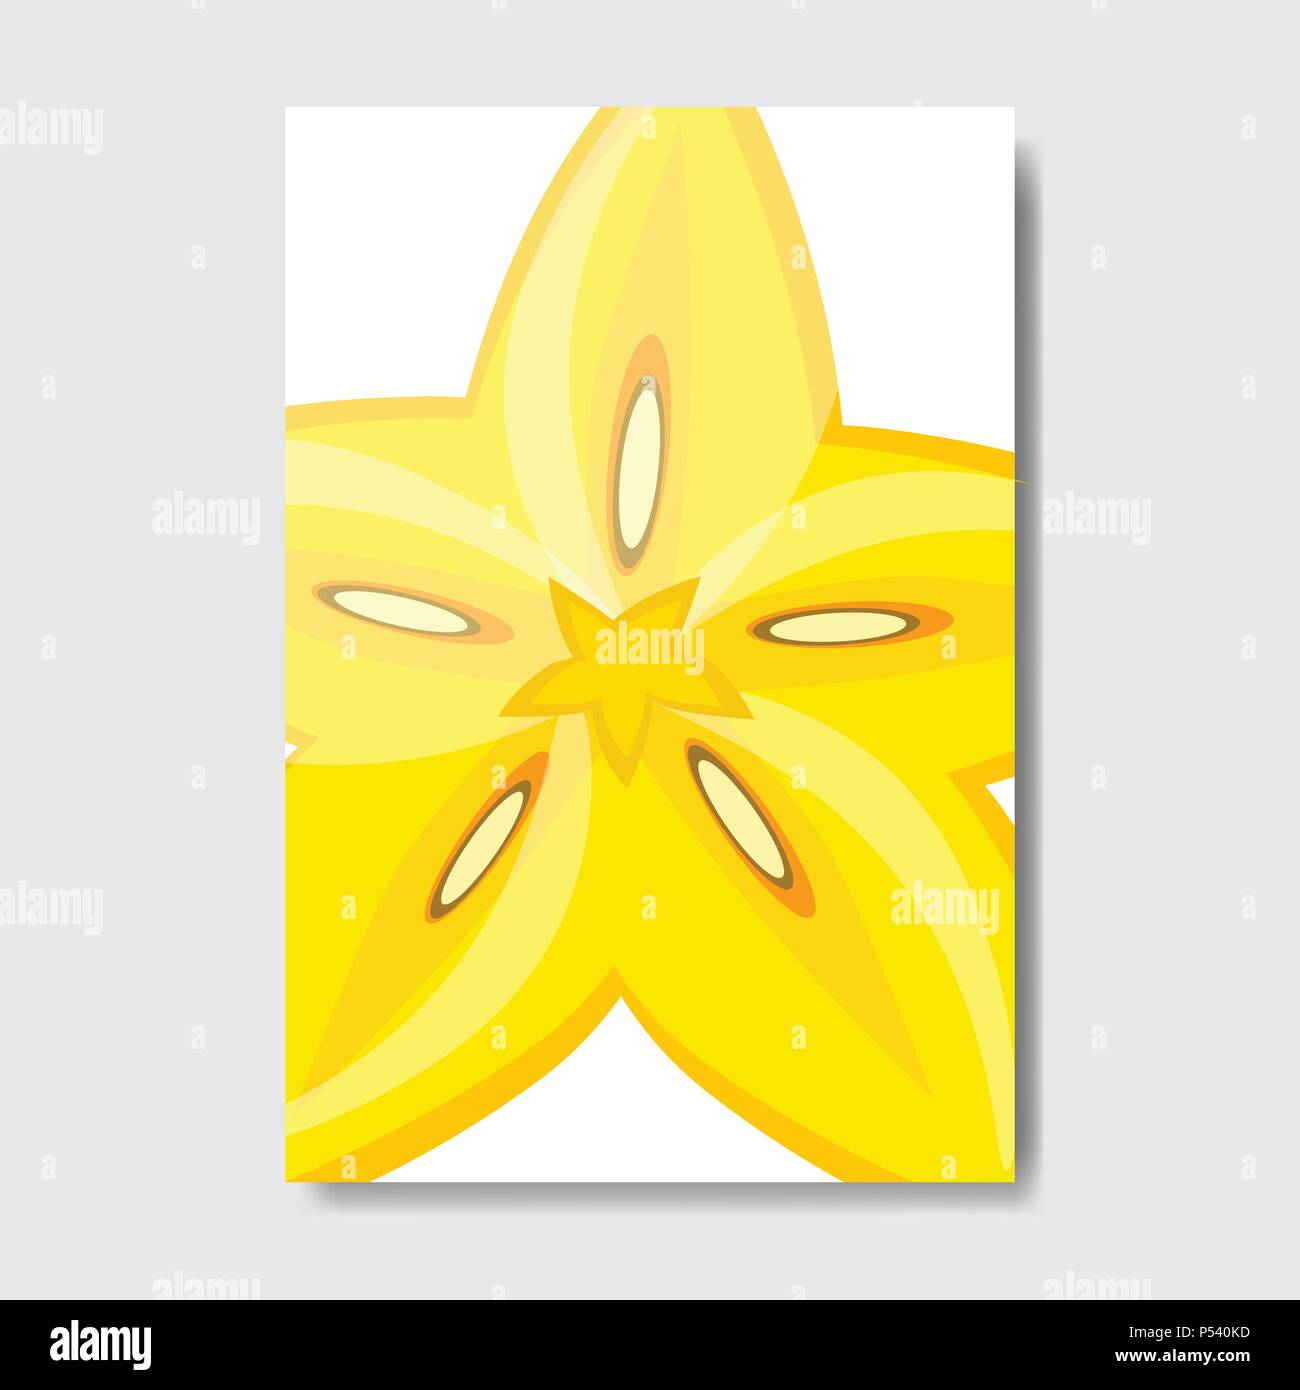 cut carambola template card, slice fresh fruit poster on white background, magazine cover vertical layout brochure poster, flat design, healthy lifestyle or diet concept Stock Vector